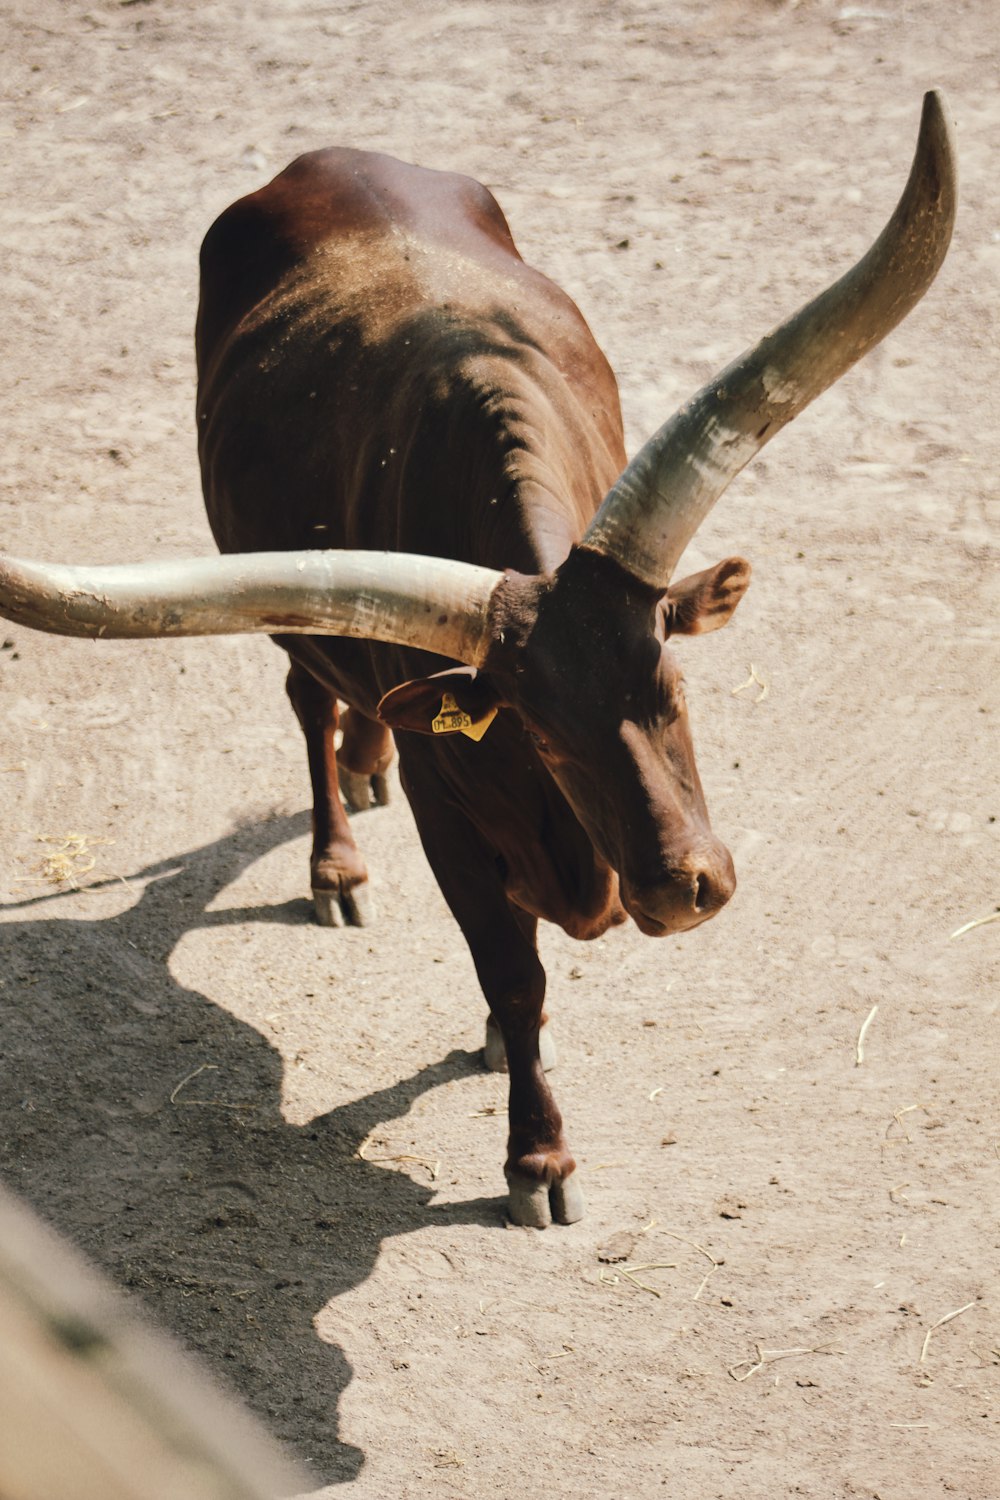 a bull with large horns standing in a dirt field